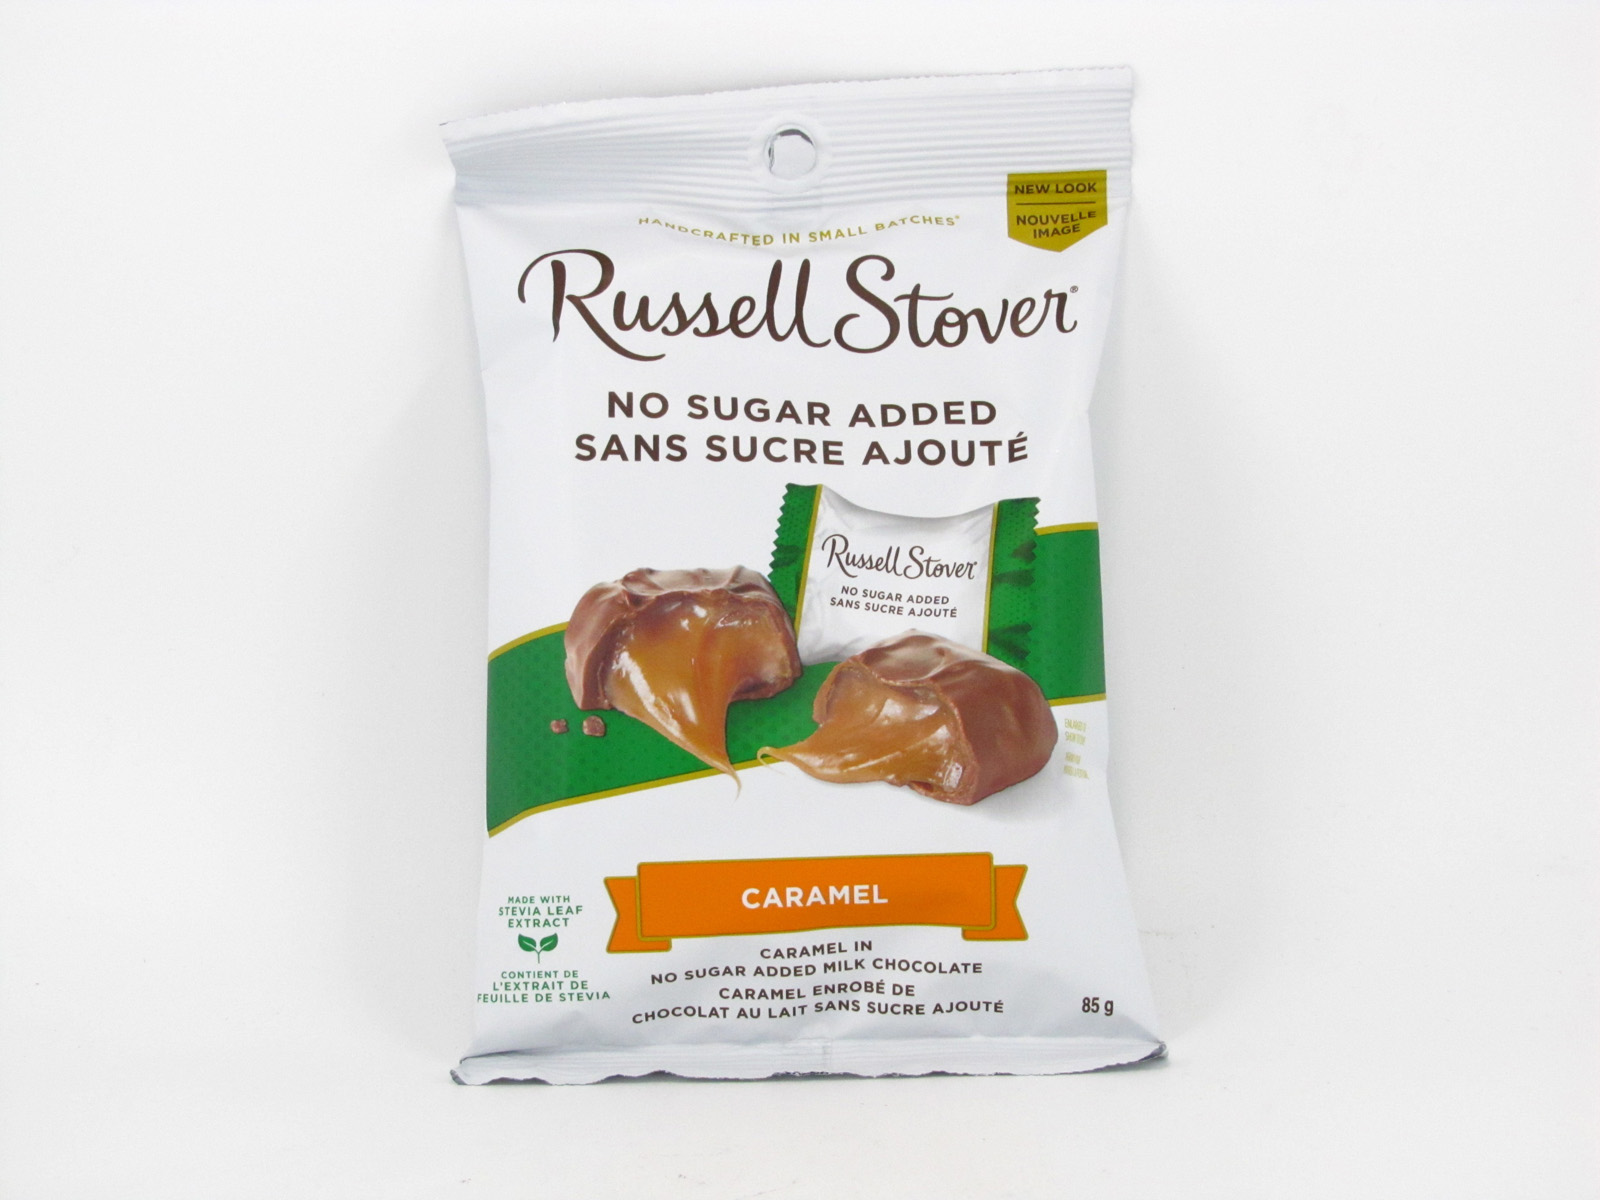 Russell Stover - Caramel - front view